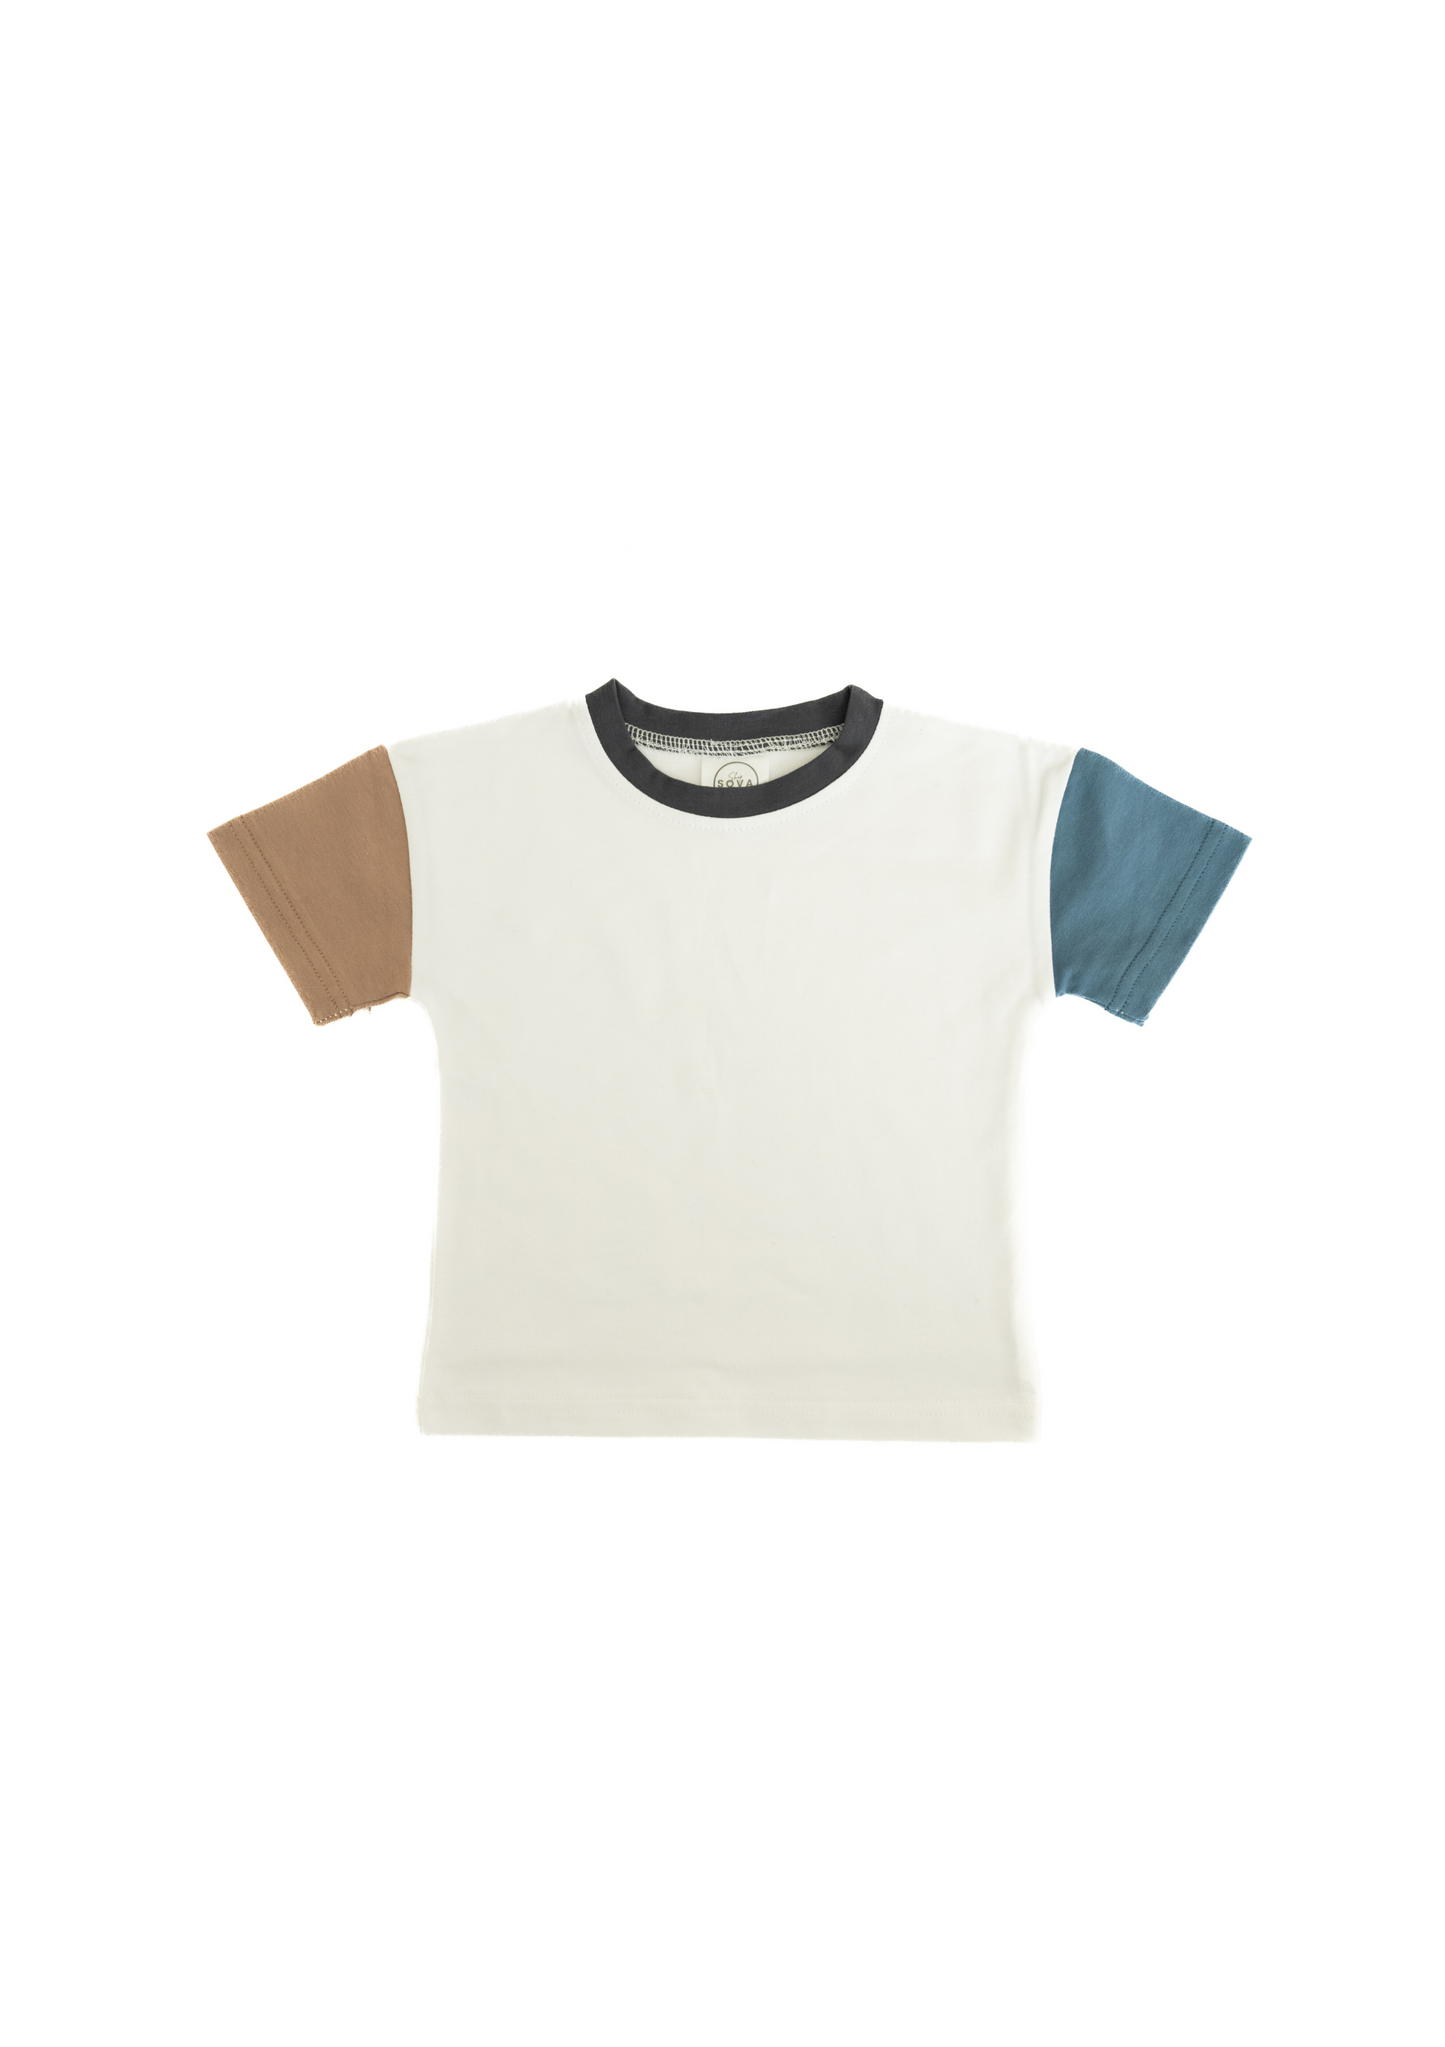 COLOR BLOCK TEE IN WHITE/CHARCOAL